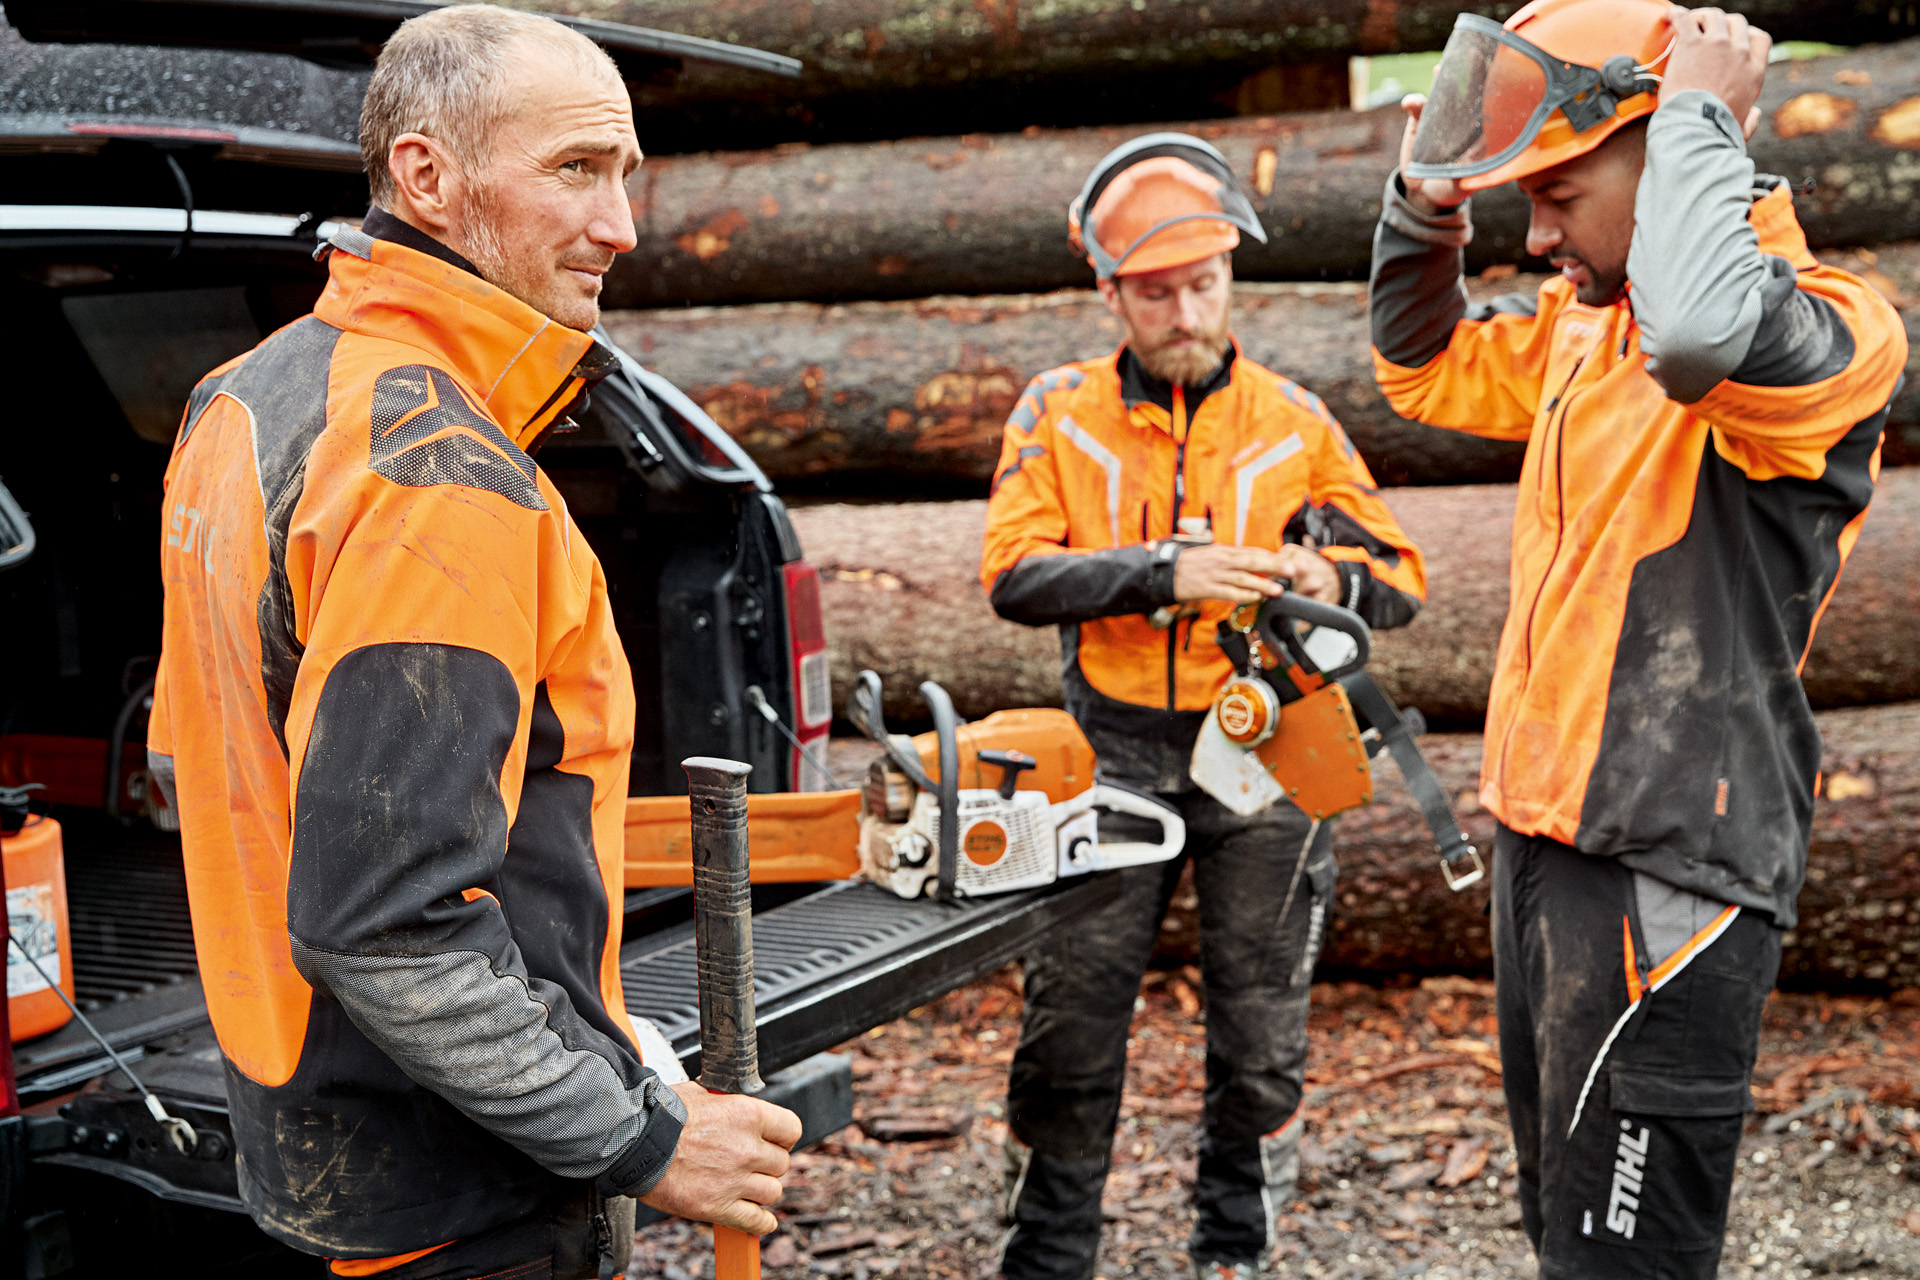 Three forestry workers wearing personal protective equipment in front of a wood billet in the forest.